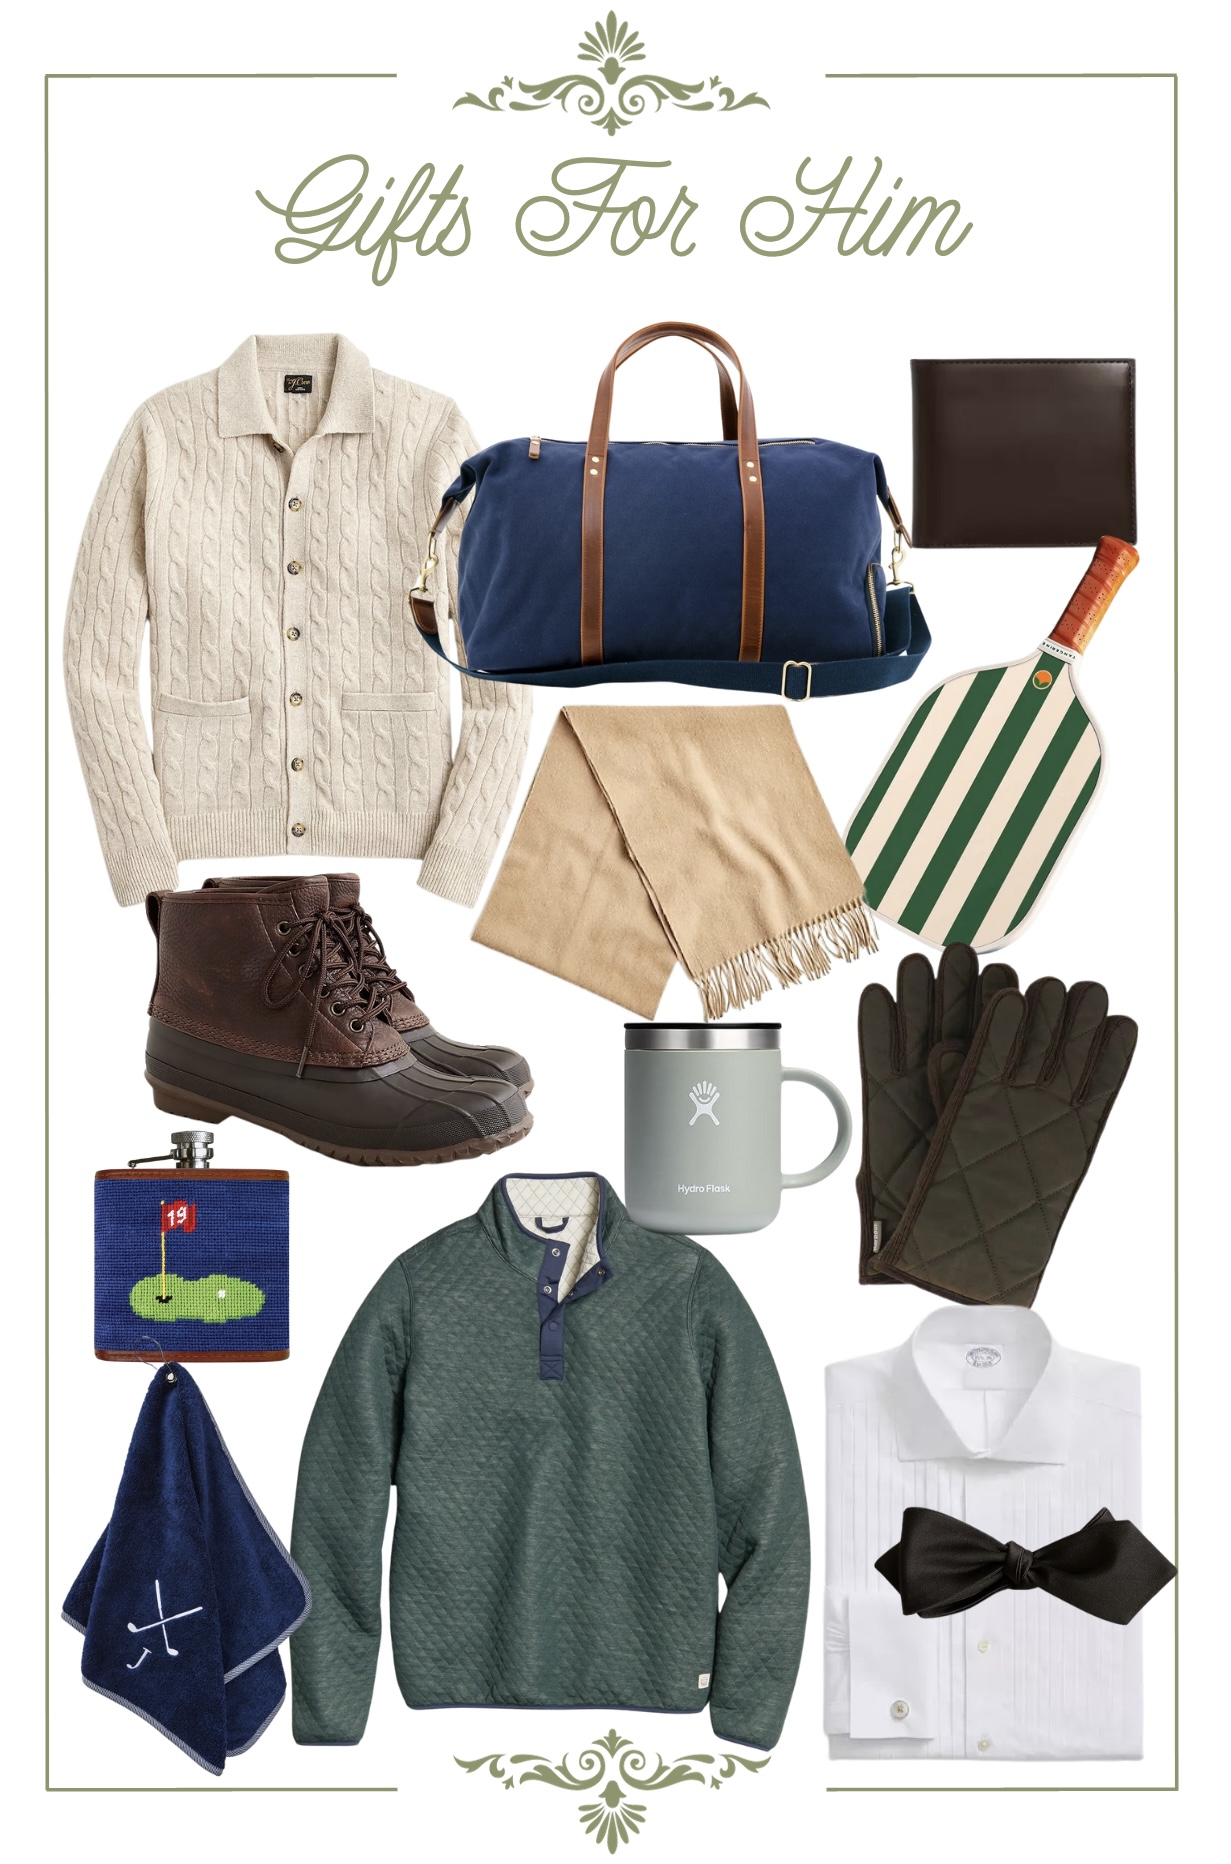 Luxury Gift Ideas for Him - Uptown with Elly Brown